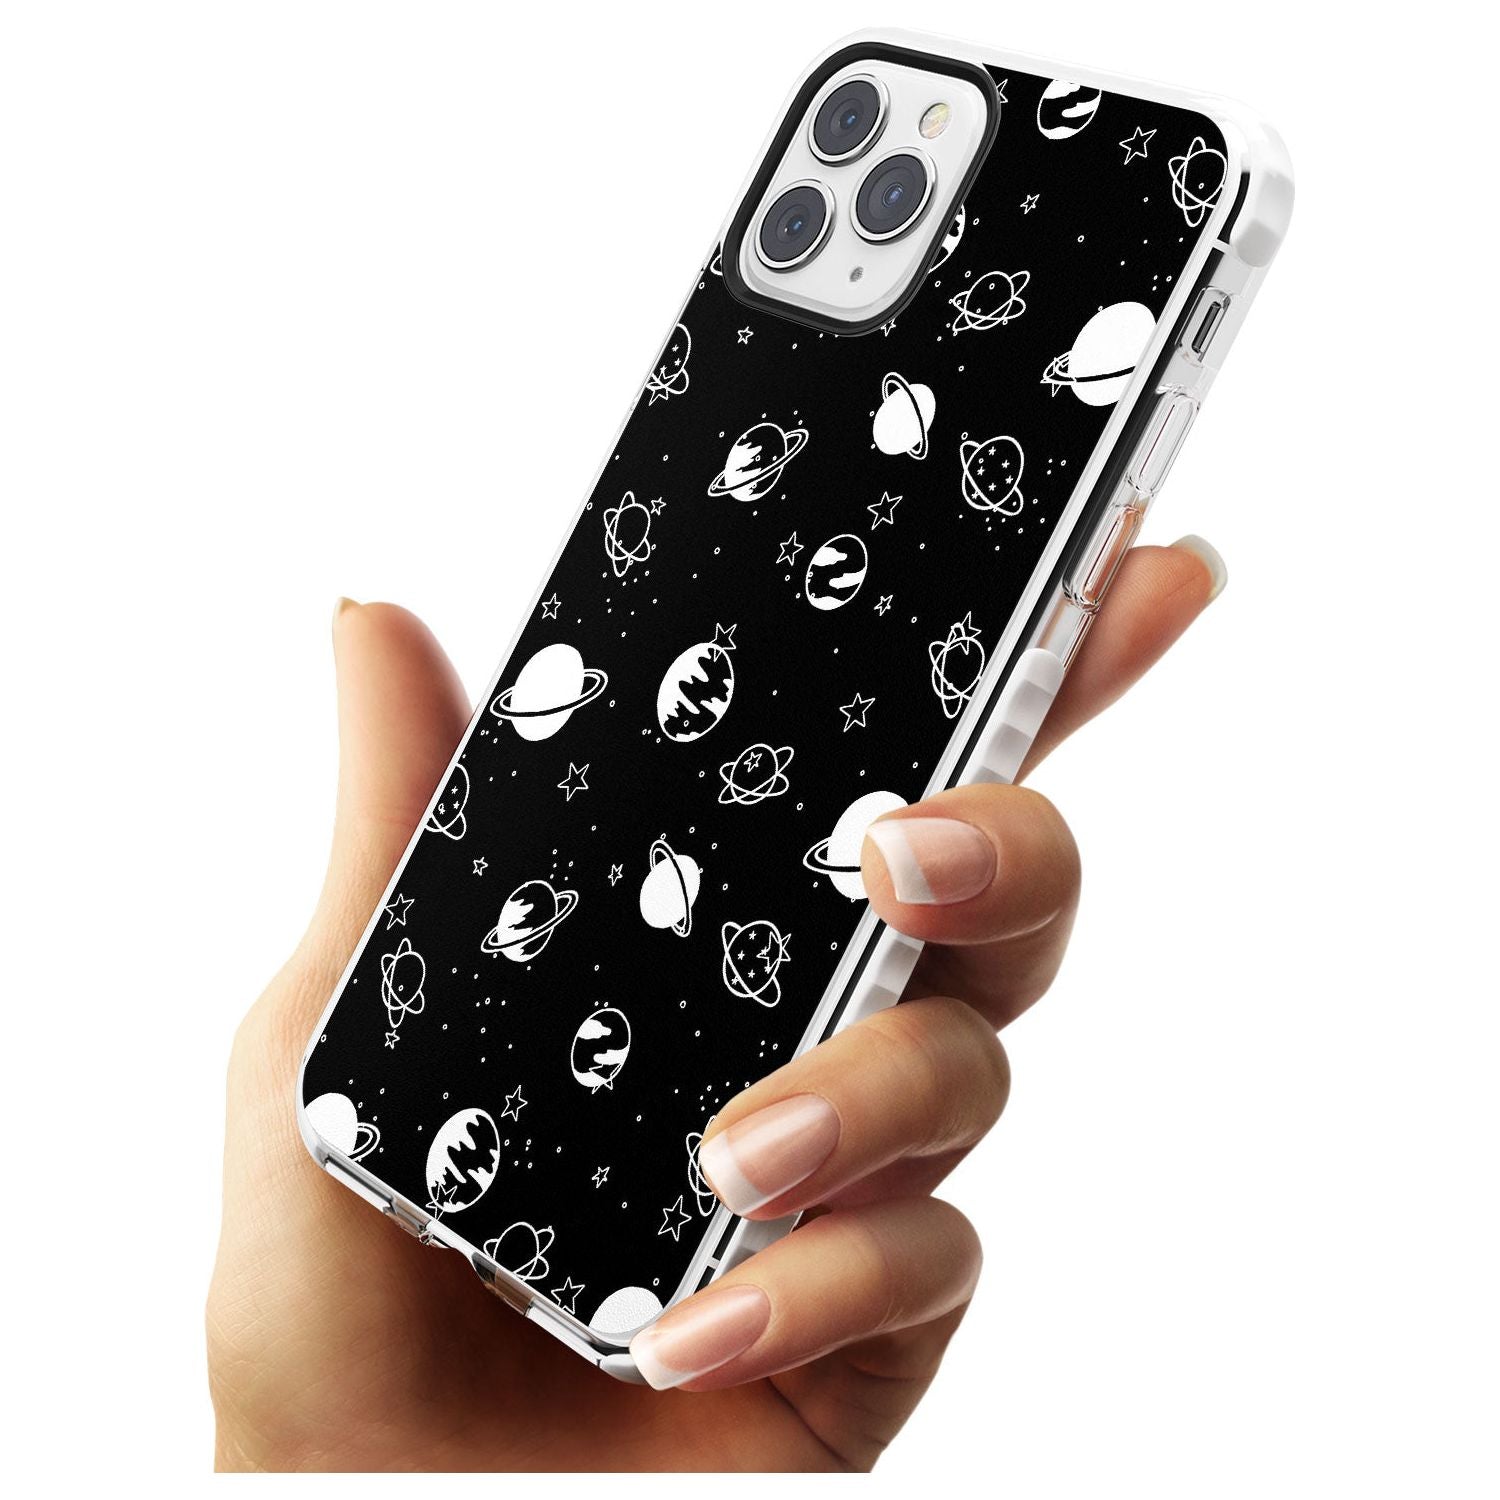 White Planets on Black Slim TPU Phone Case for iPhone 11 Pro Max